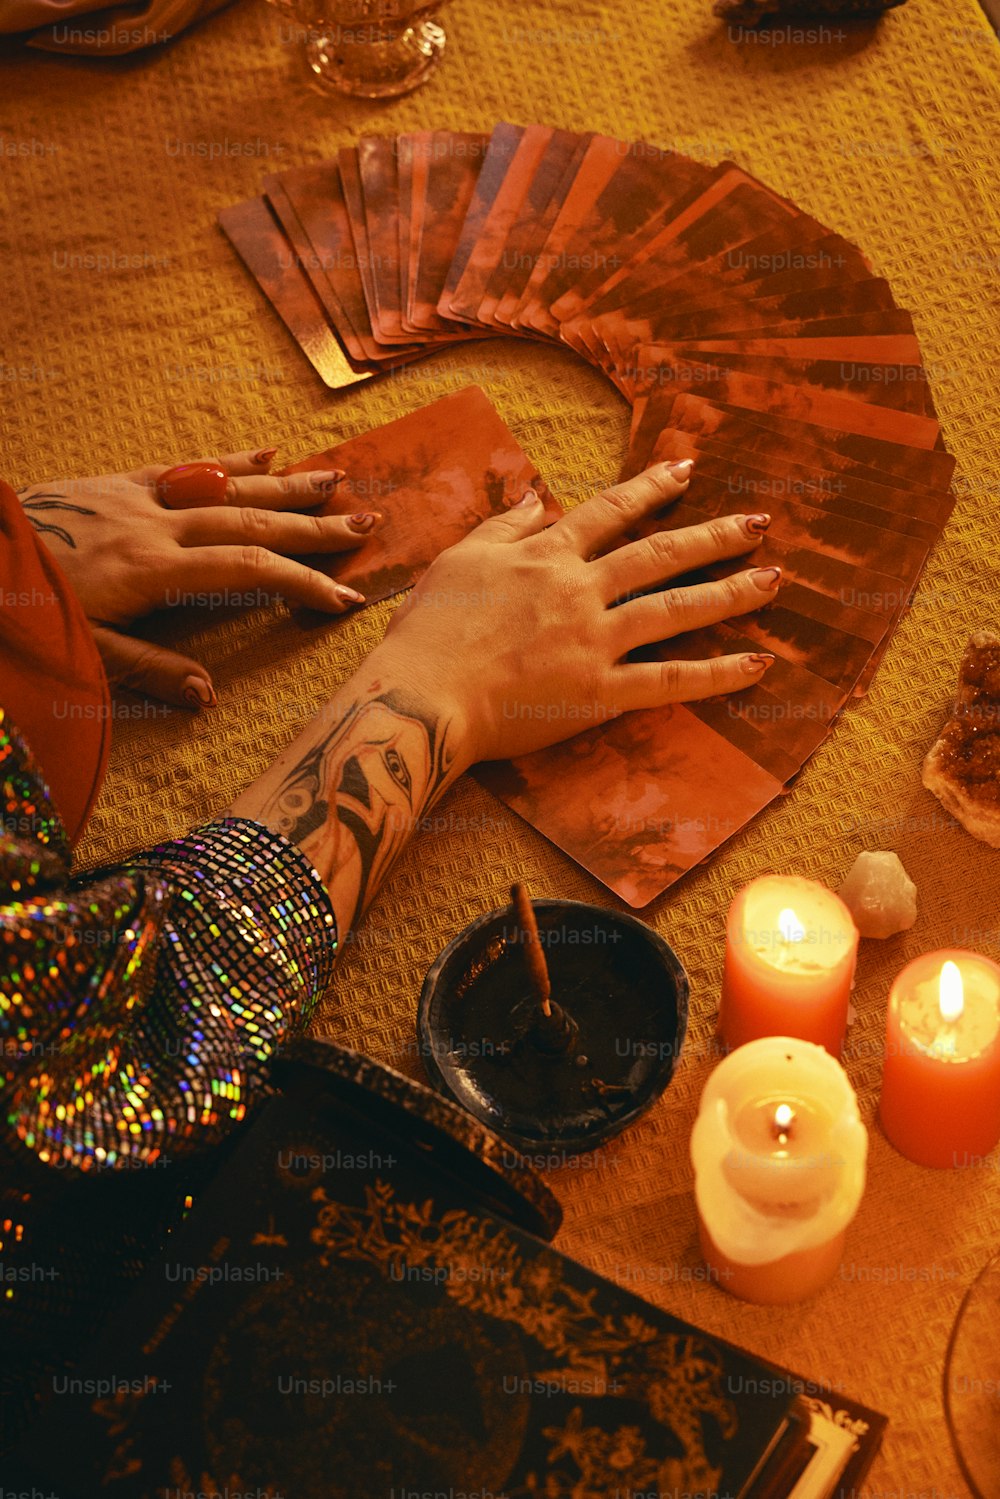 a person's hands on a table surrounded by candles